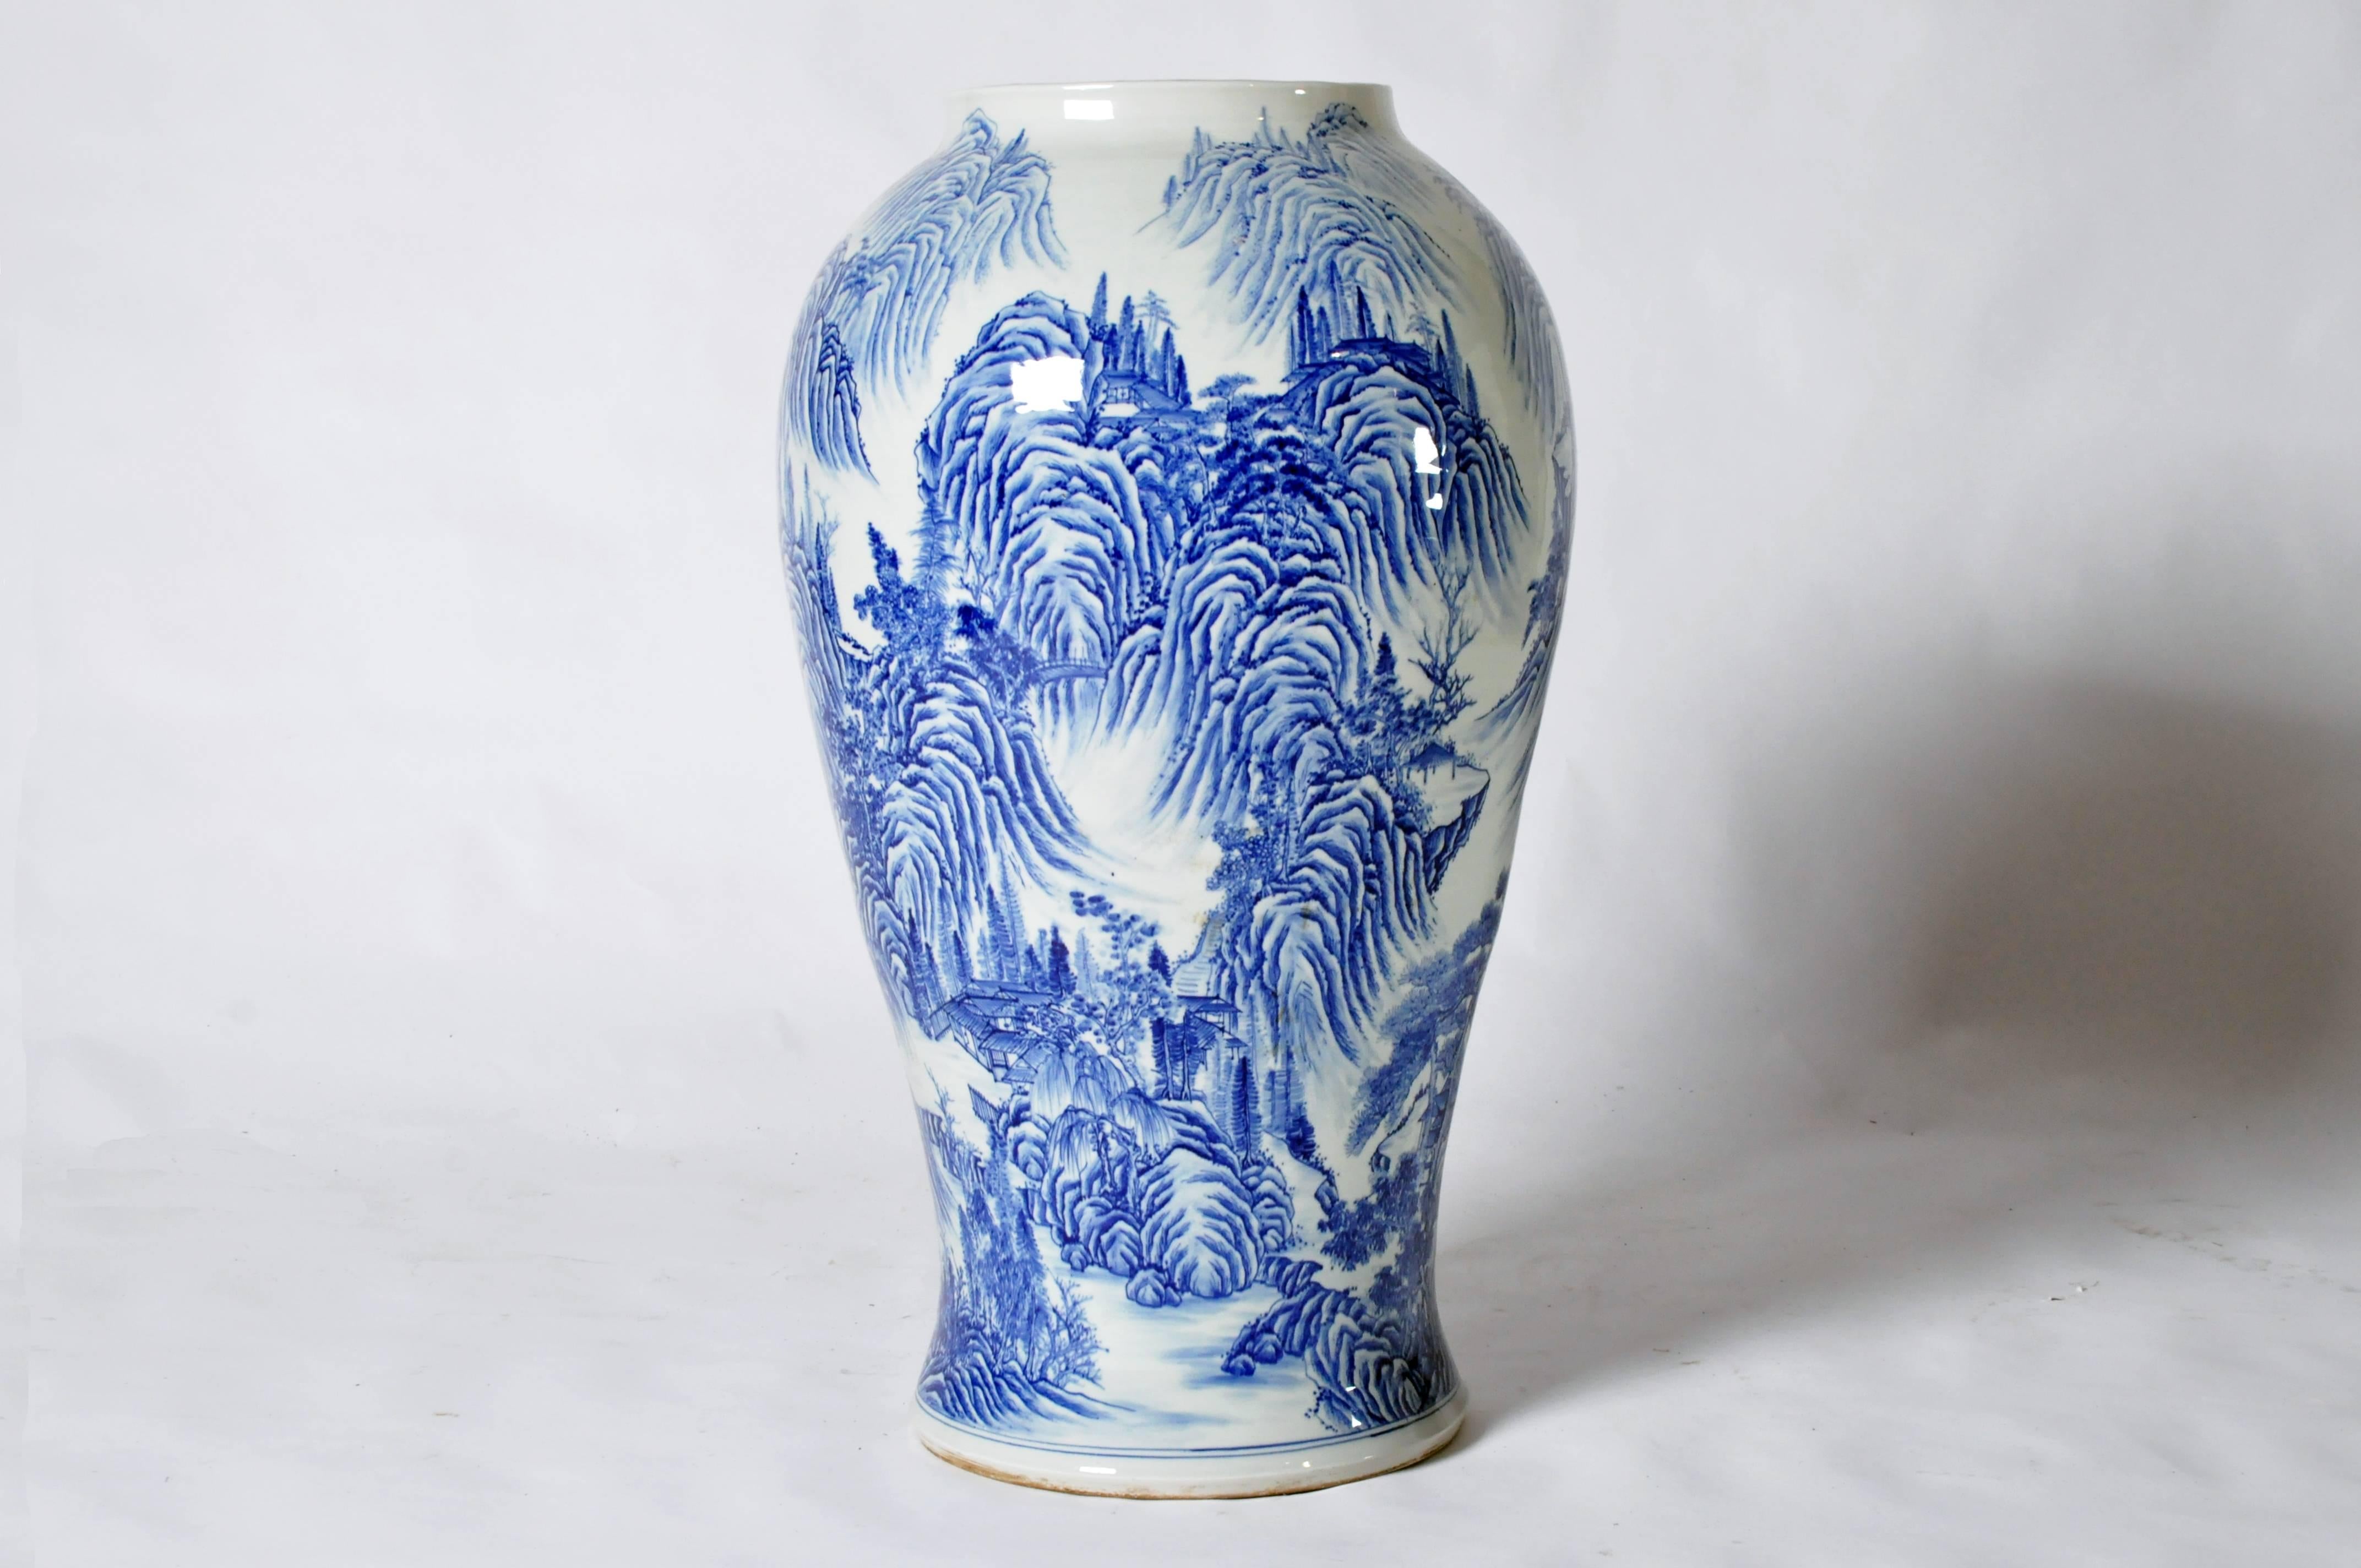 This impressive blue and white ceramic vase is from Japan, circa 1950.